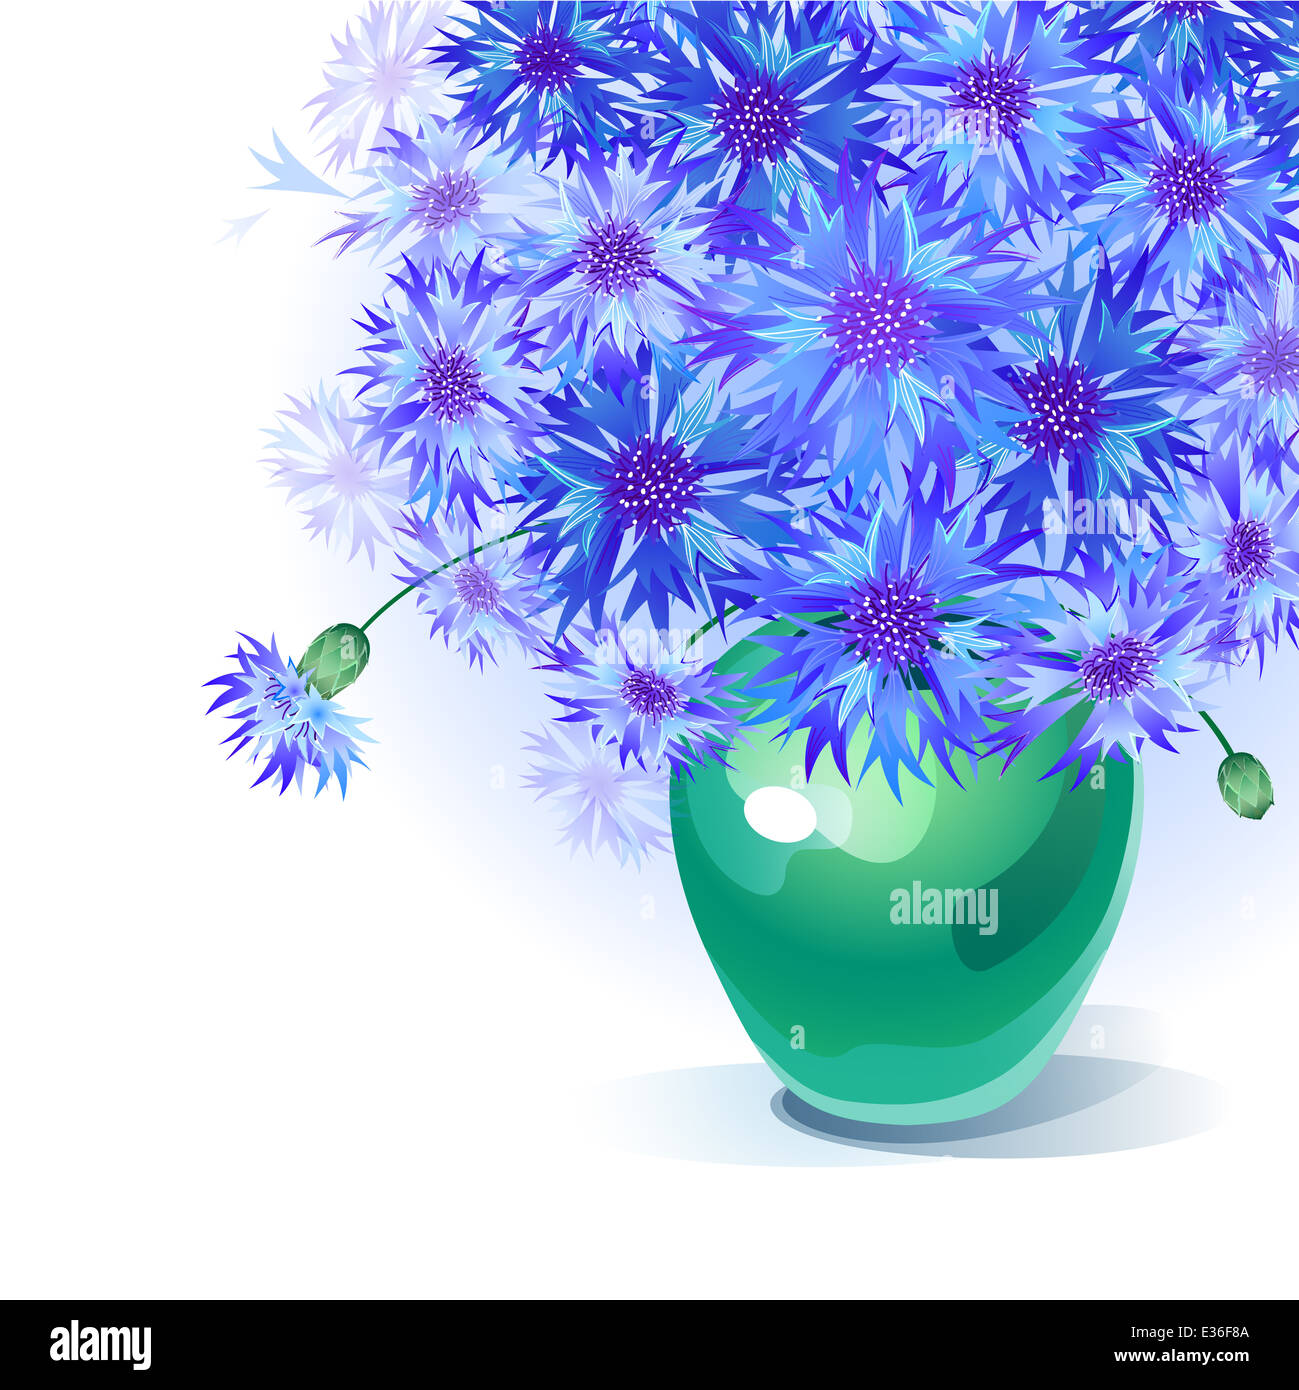 Greeting card with gentle bluebottle bouquet in green vase Stock Photo